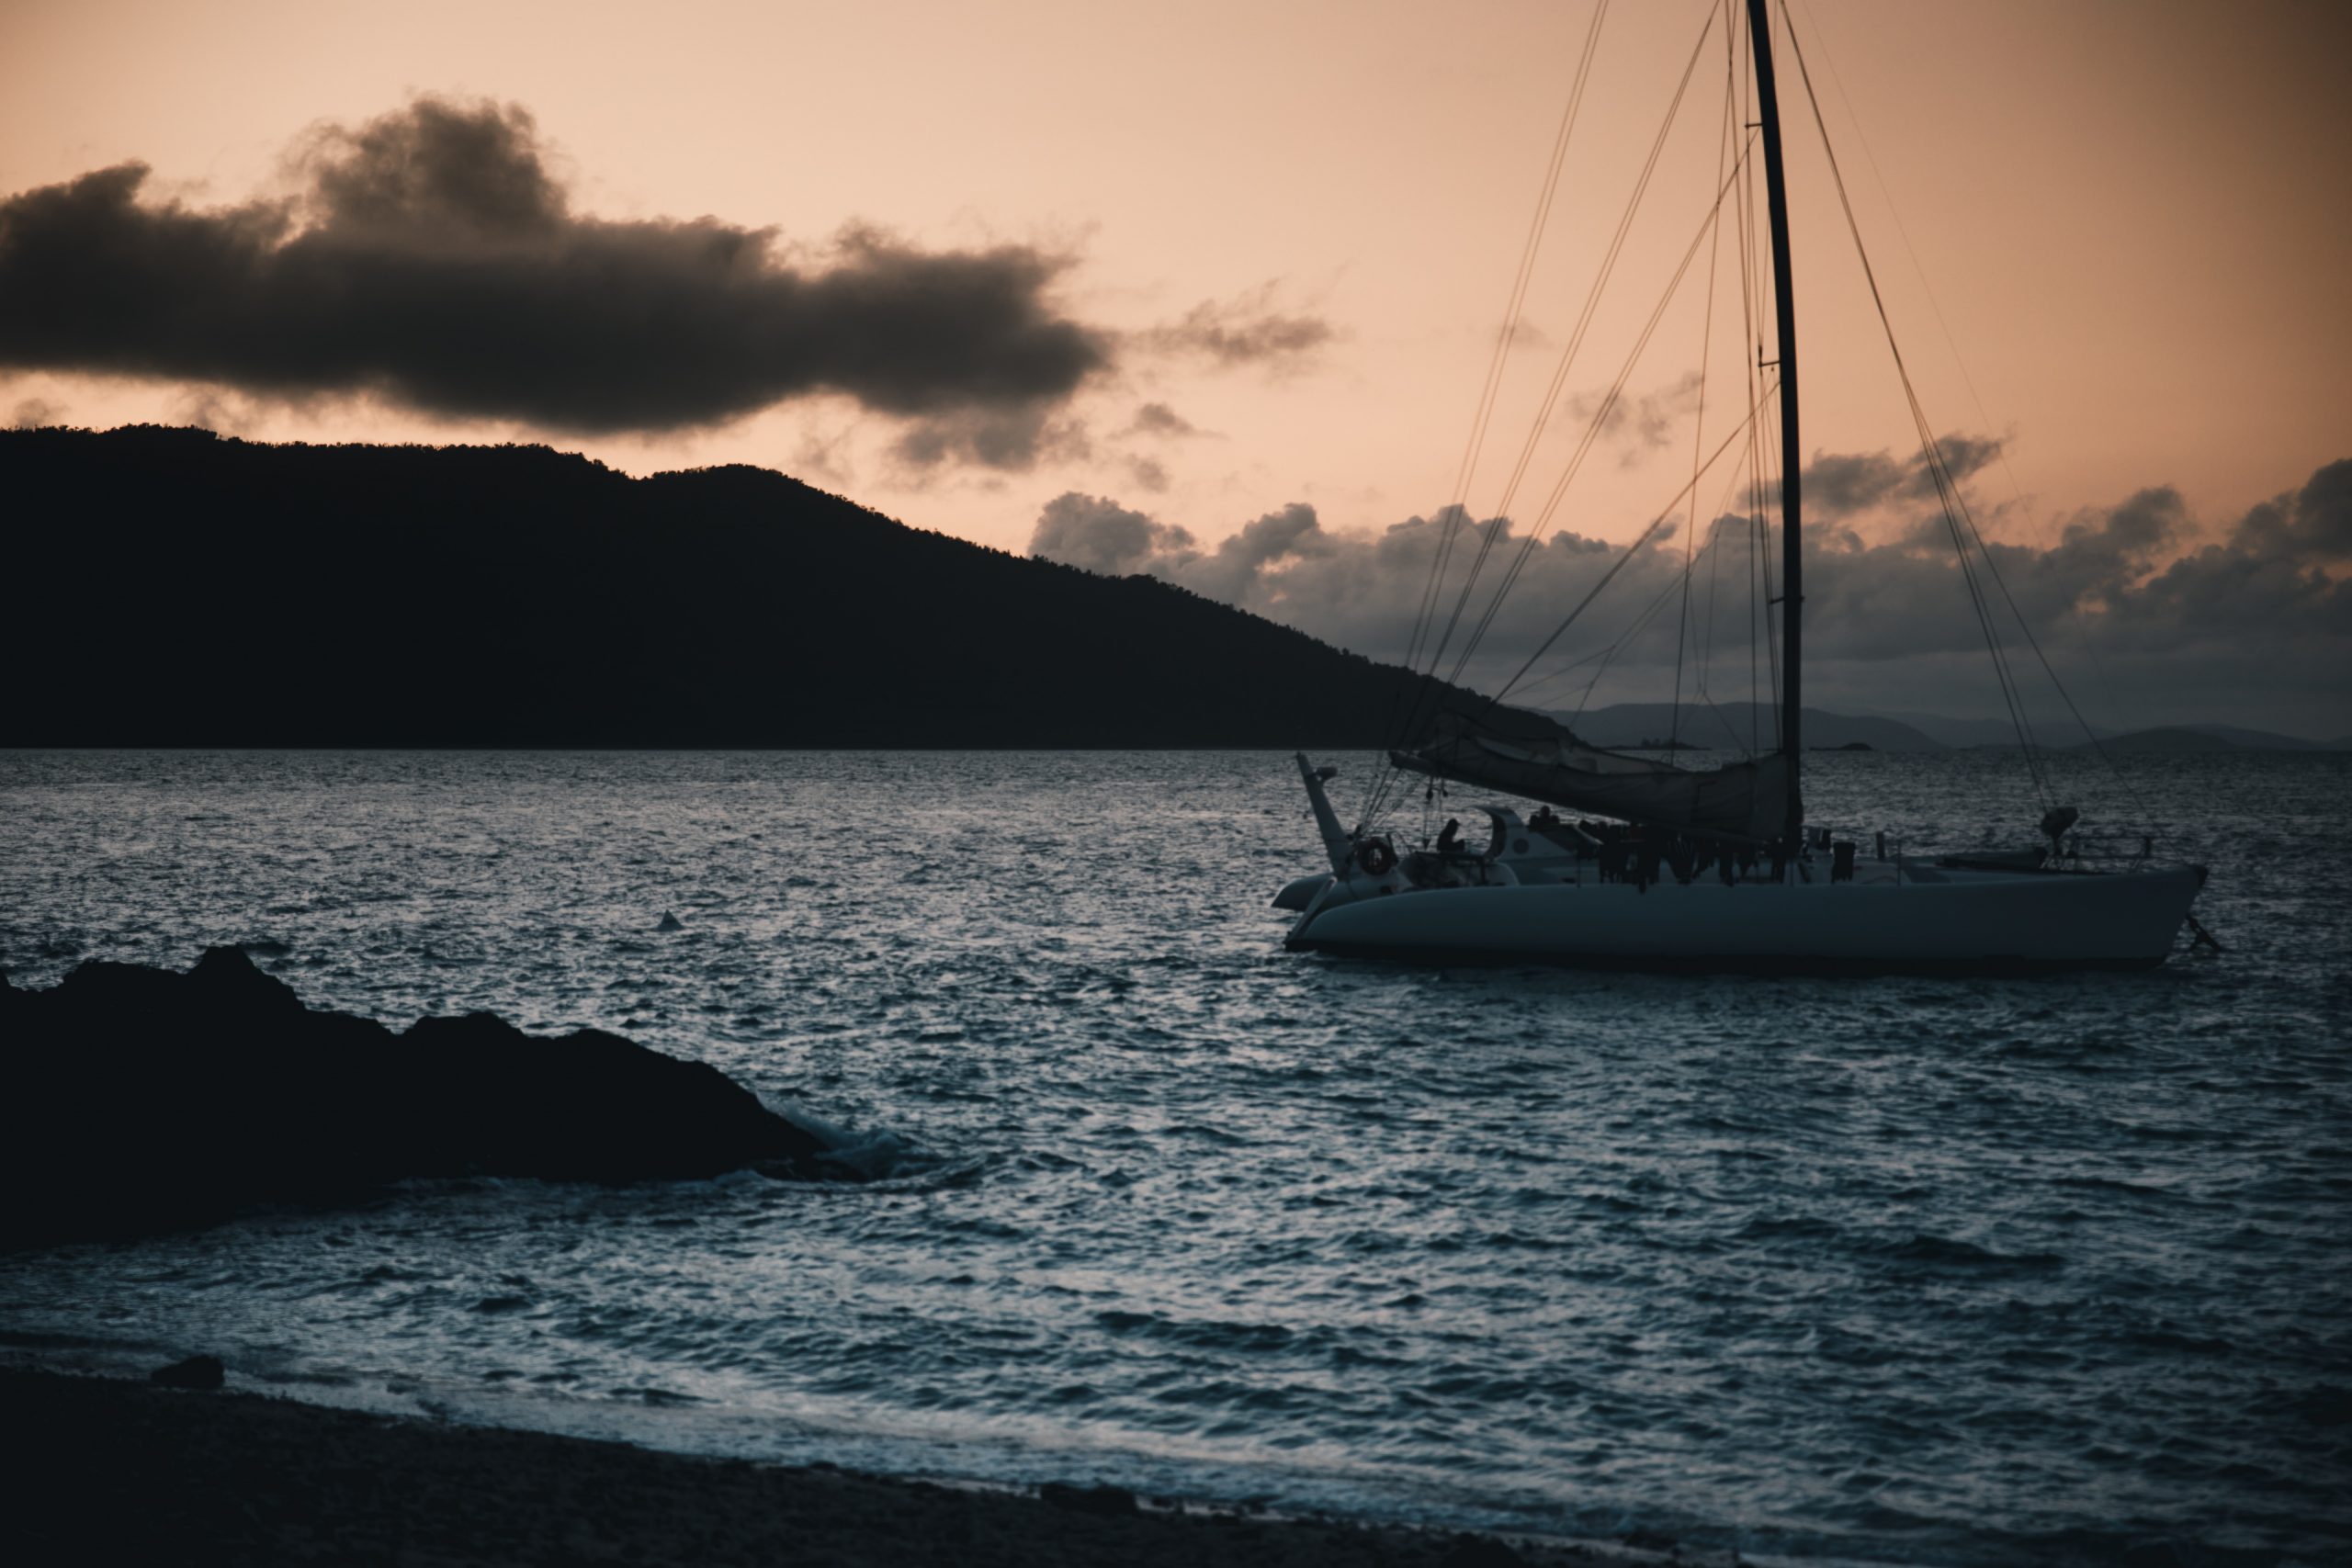 Sail boat during a sunset at daydream island (Whitsunday Islands, Queensland Australia)